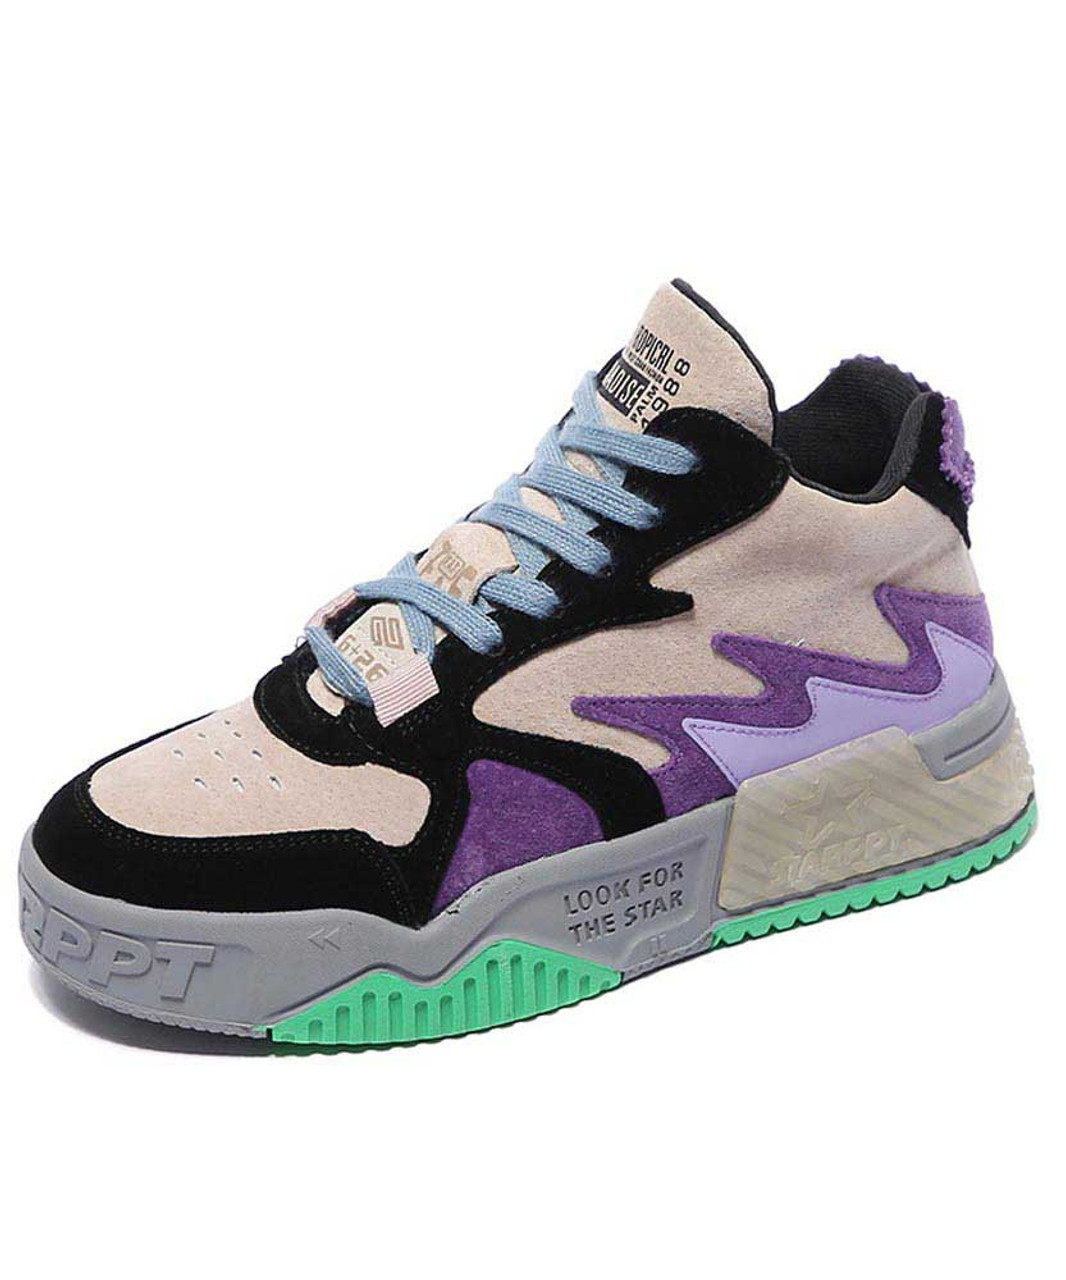 Grey the star multi color shoe sneaker | Womens sneakers shoes online 2487WS